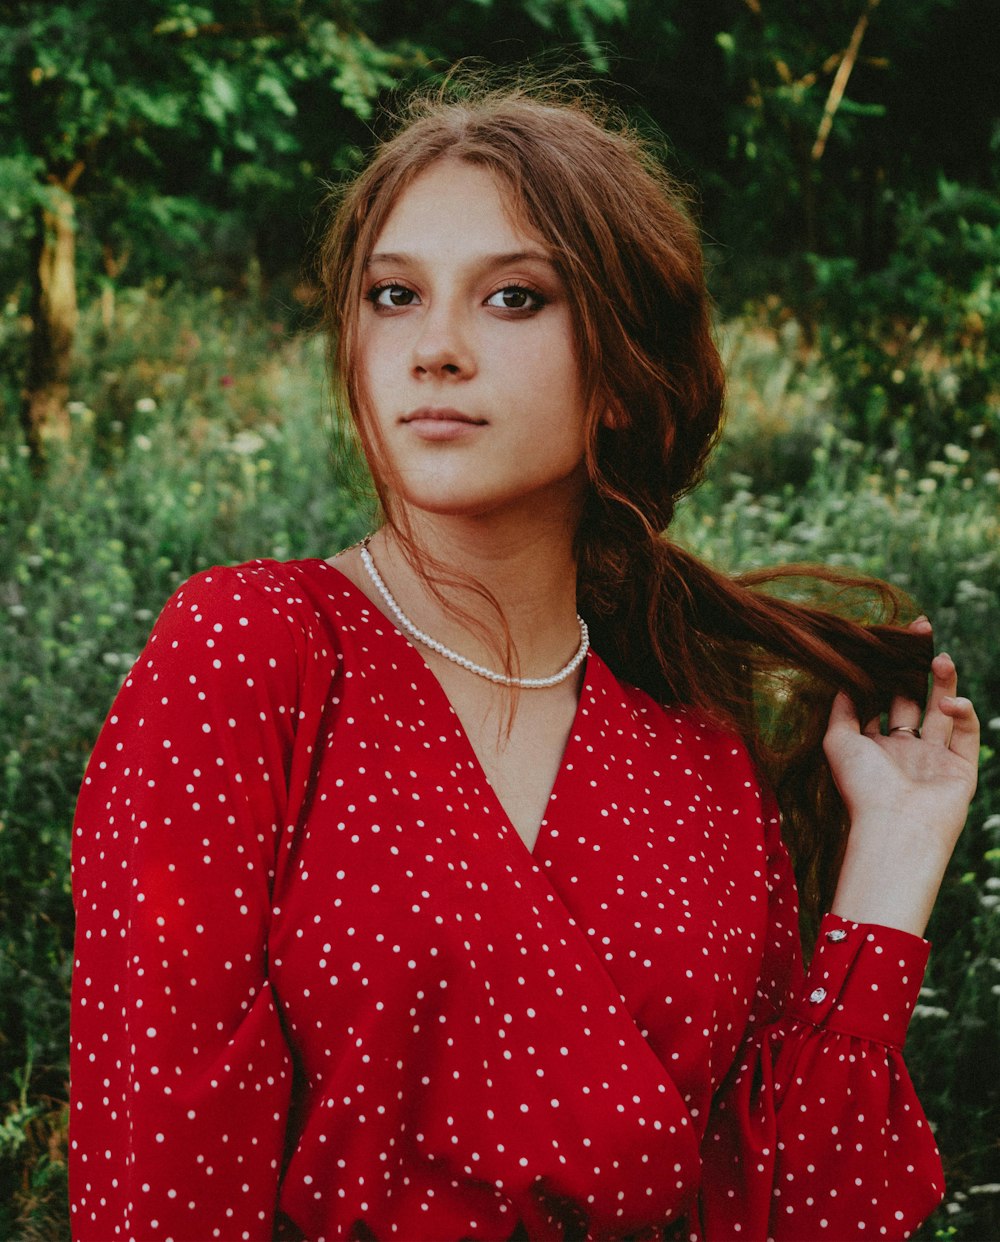 a woman in a red polka dot shirt posing for a picture